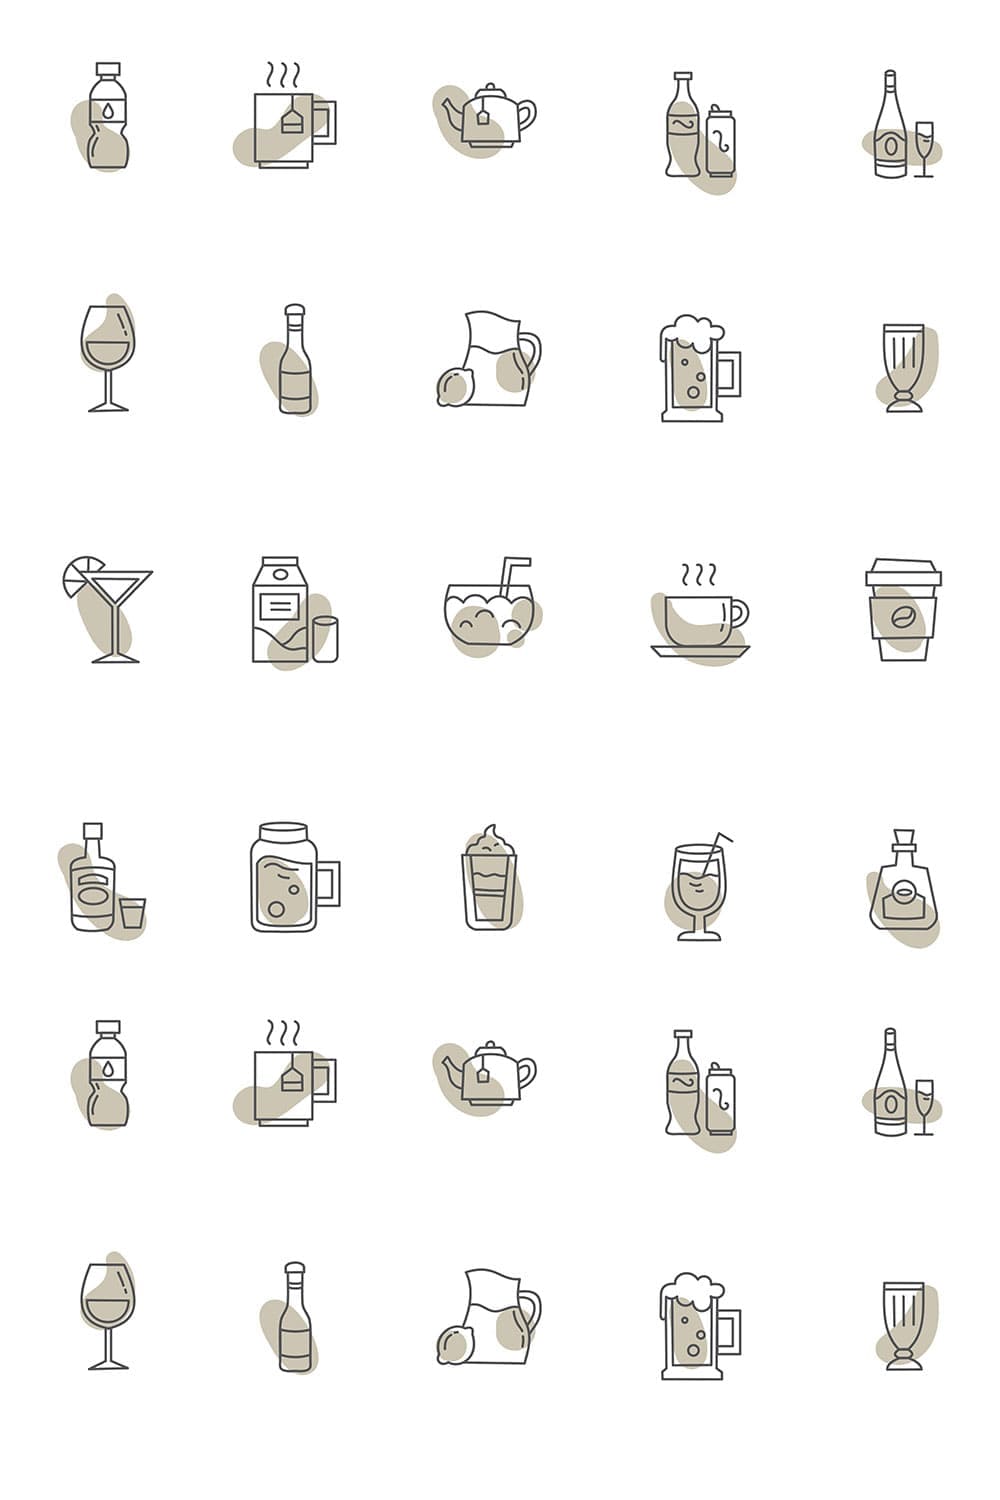 Drinking icons set, picture for pinterest.